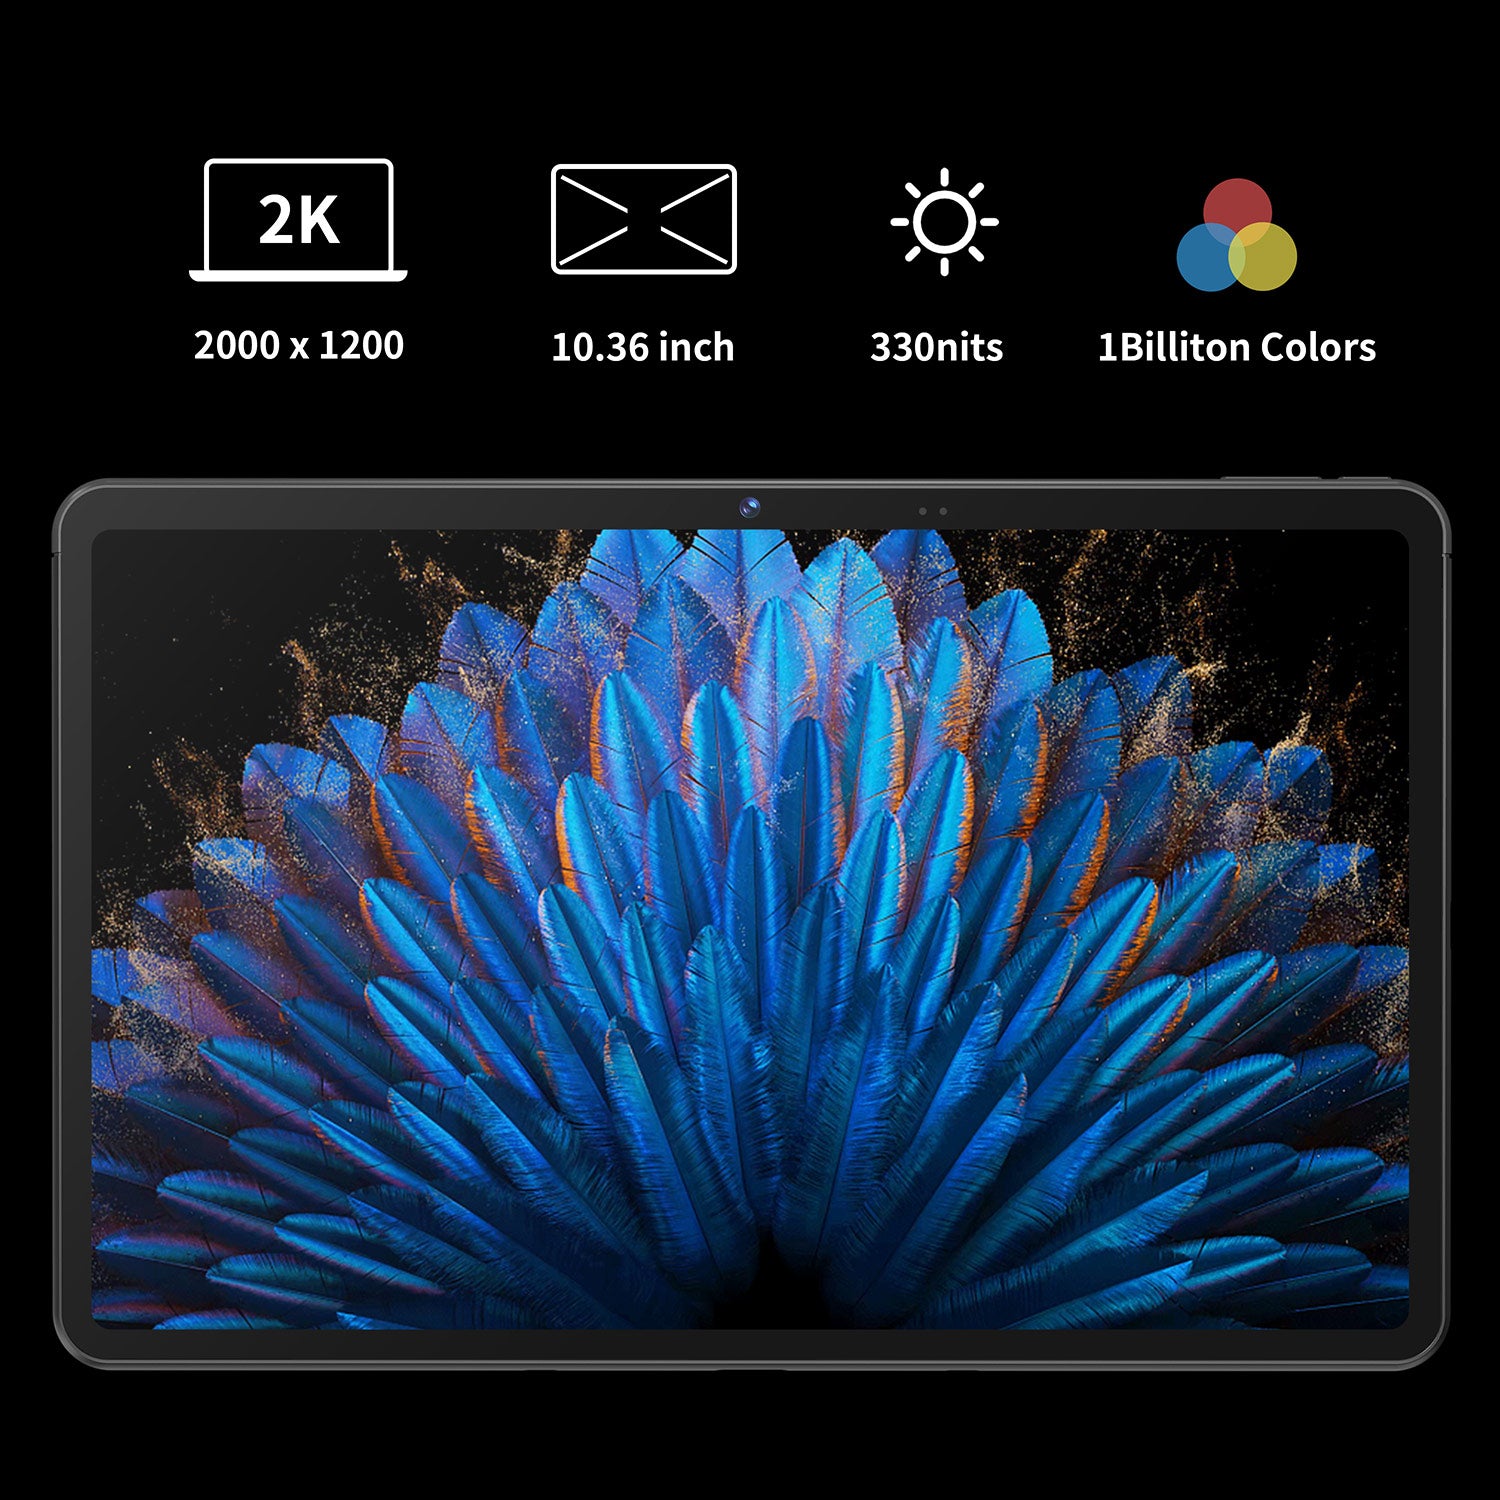 LincPlus 【T3】 Tablet | Android 13 | 10’36 inch | 8+128GB